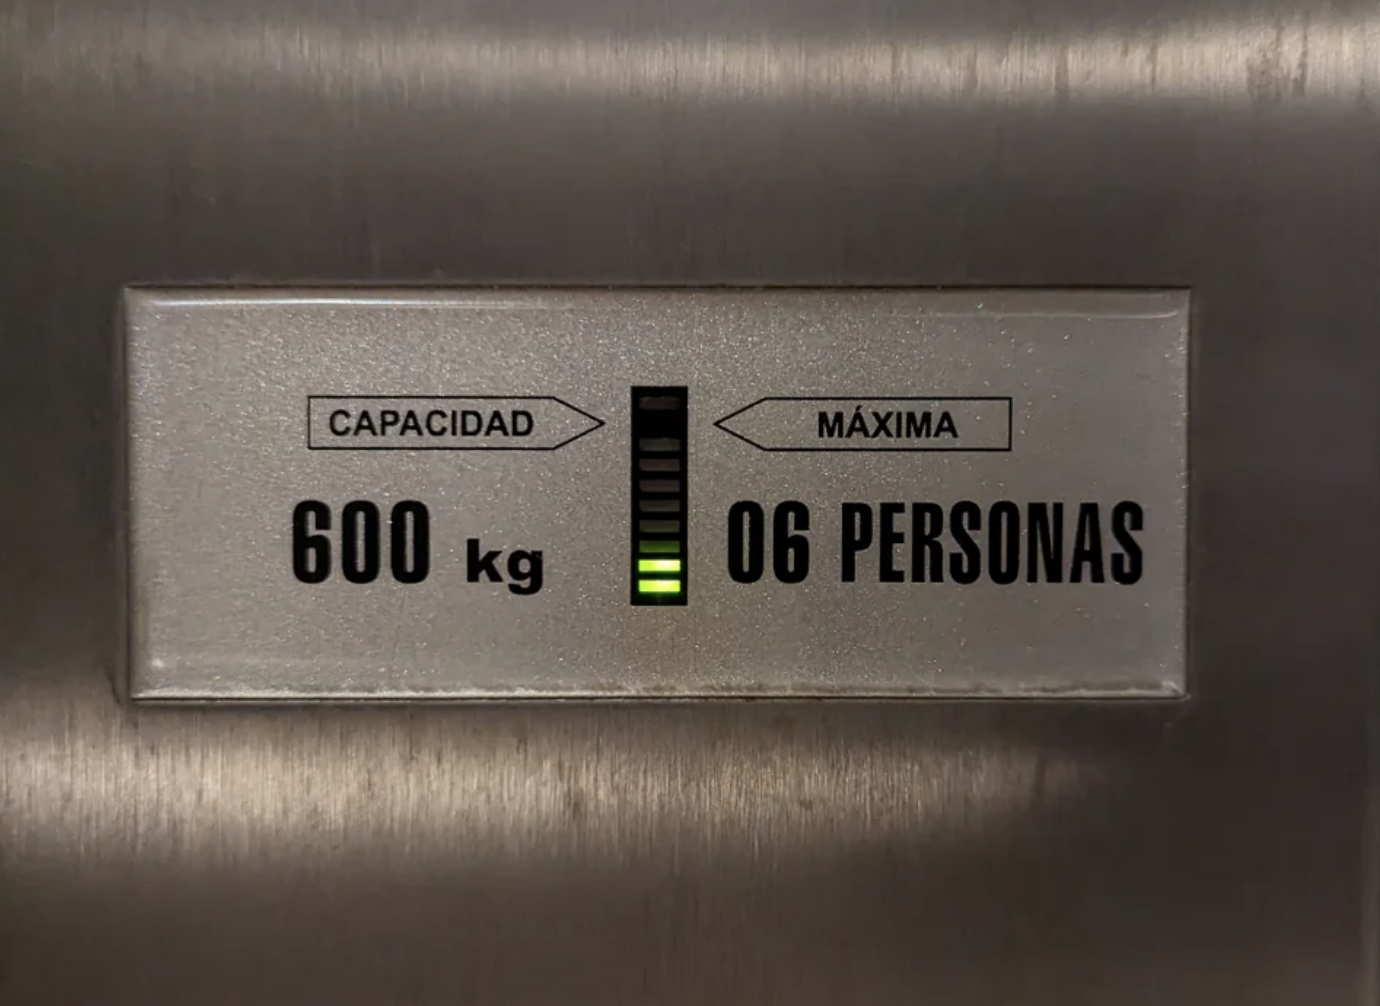 A sensor on an elevator displaying the weight